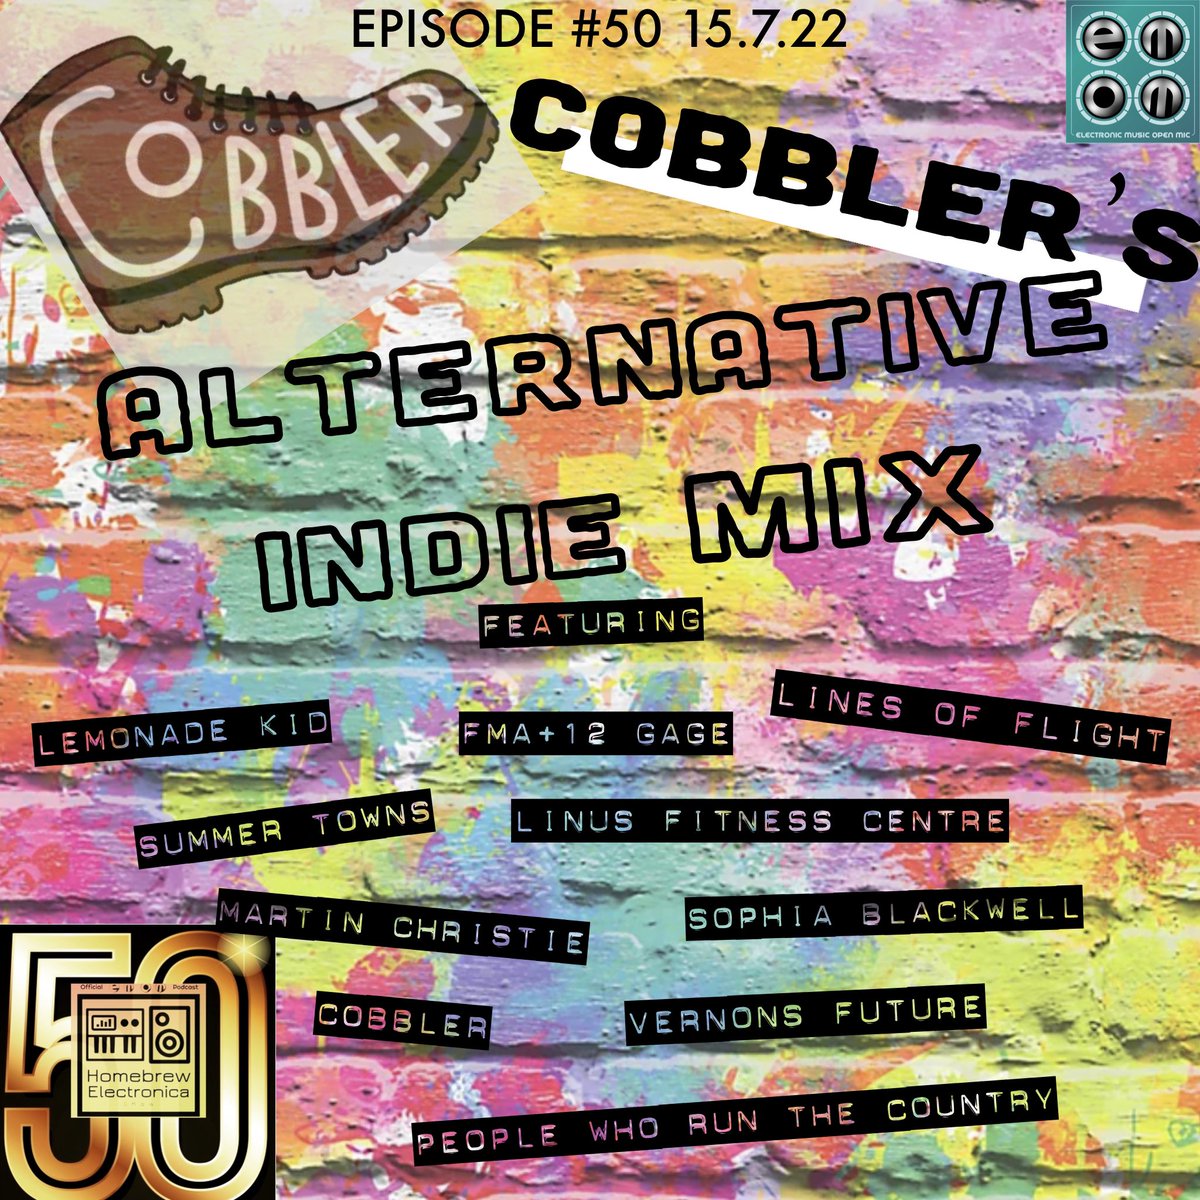 Thrilled to reveal the first of 3 exclusive special guest mixes coming to the 50th episode 🤩 @Cobbler_uk’s Alternative Indie Mix is banging ! Featuring @Lemonade_Kid @Fma12Gage @linesof_flight @TownsSummer @linusfc @mart_christie @SophiaBlackwell @VernonsThe @thepeoplewhorun